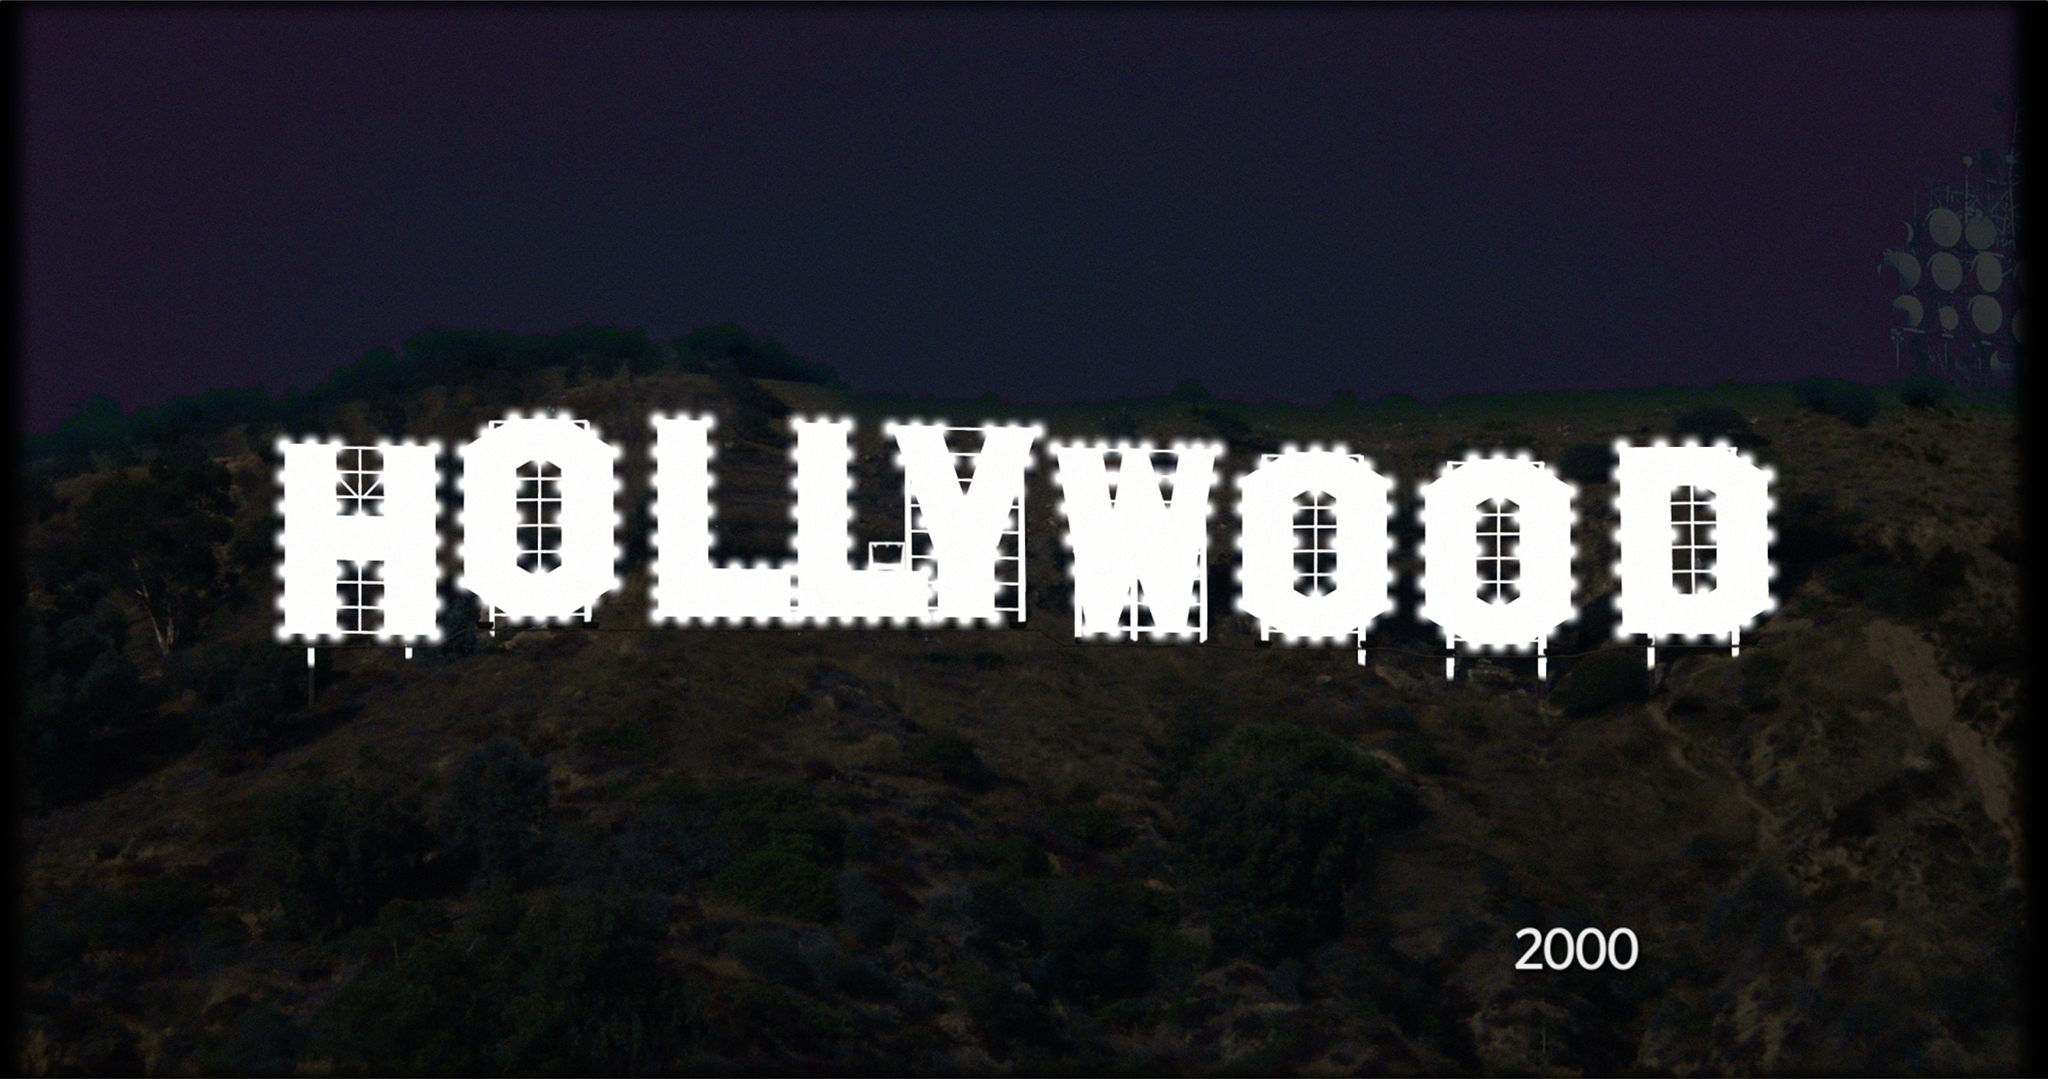 A Brief History of Hollywood (Director ~ Writer ~ Producer)